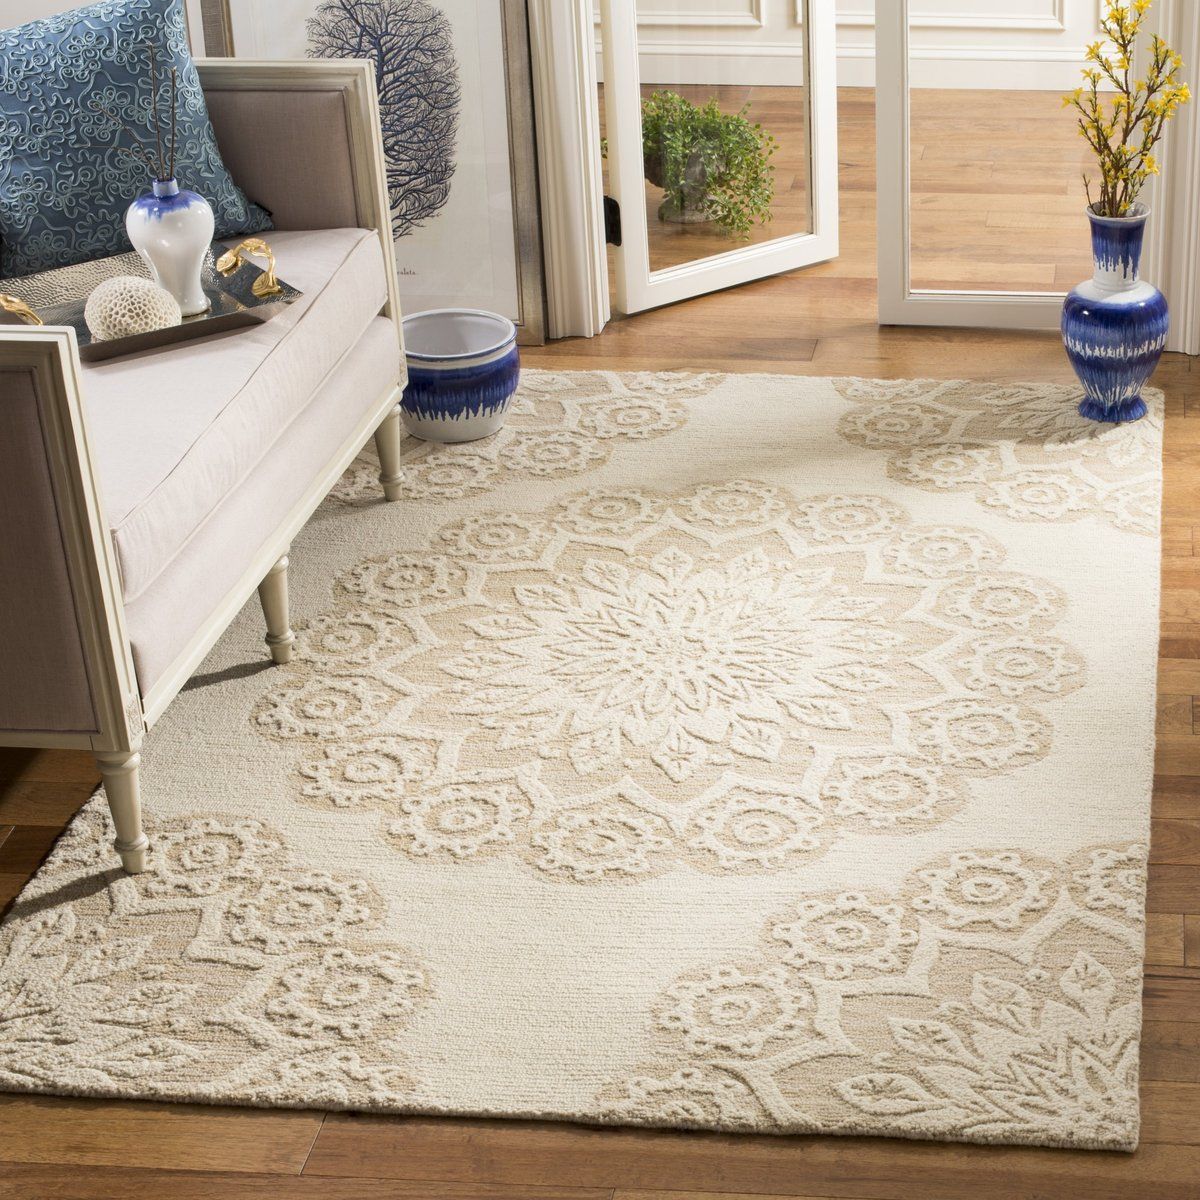 Safavieh Blossom Blm 108 Rugs | Rugs Direct Intended For Ivory Blossom Oval Rugs (View 9 of 15)